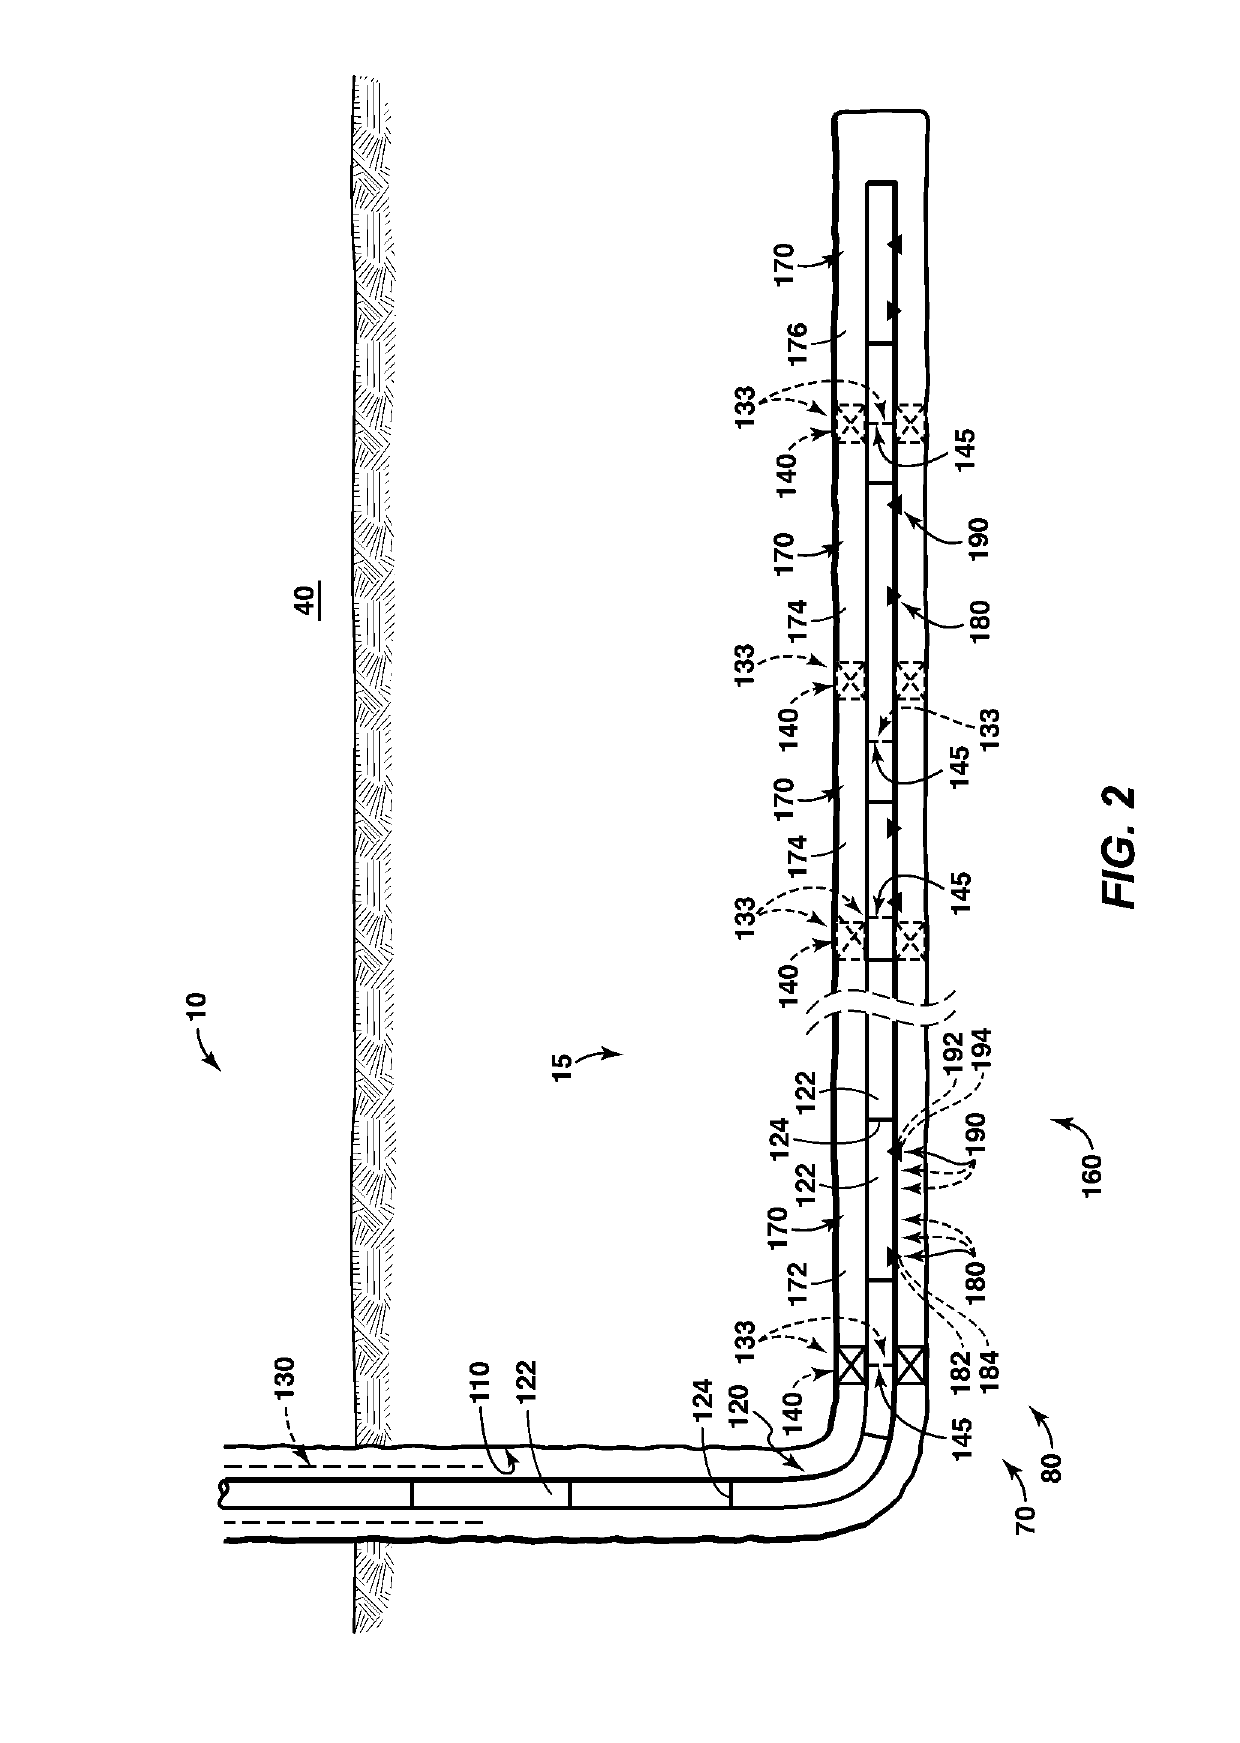 Systems and Methods For Stimulating A Subterranean Formation